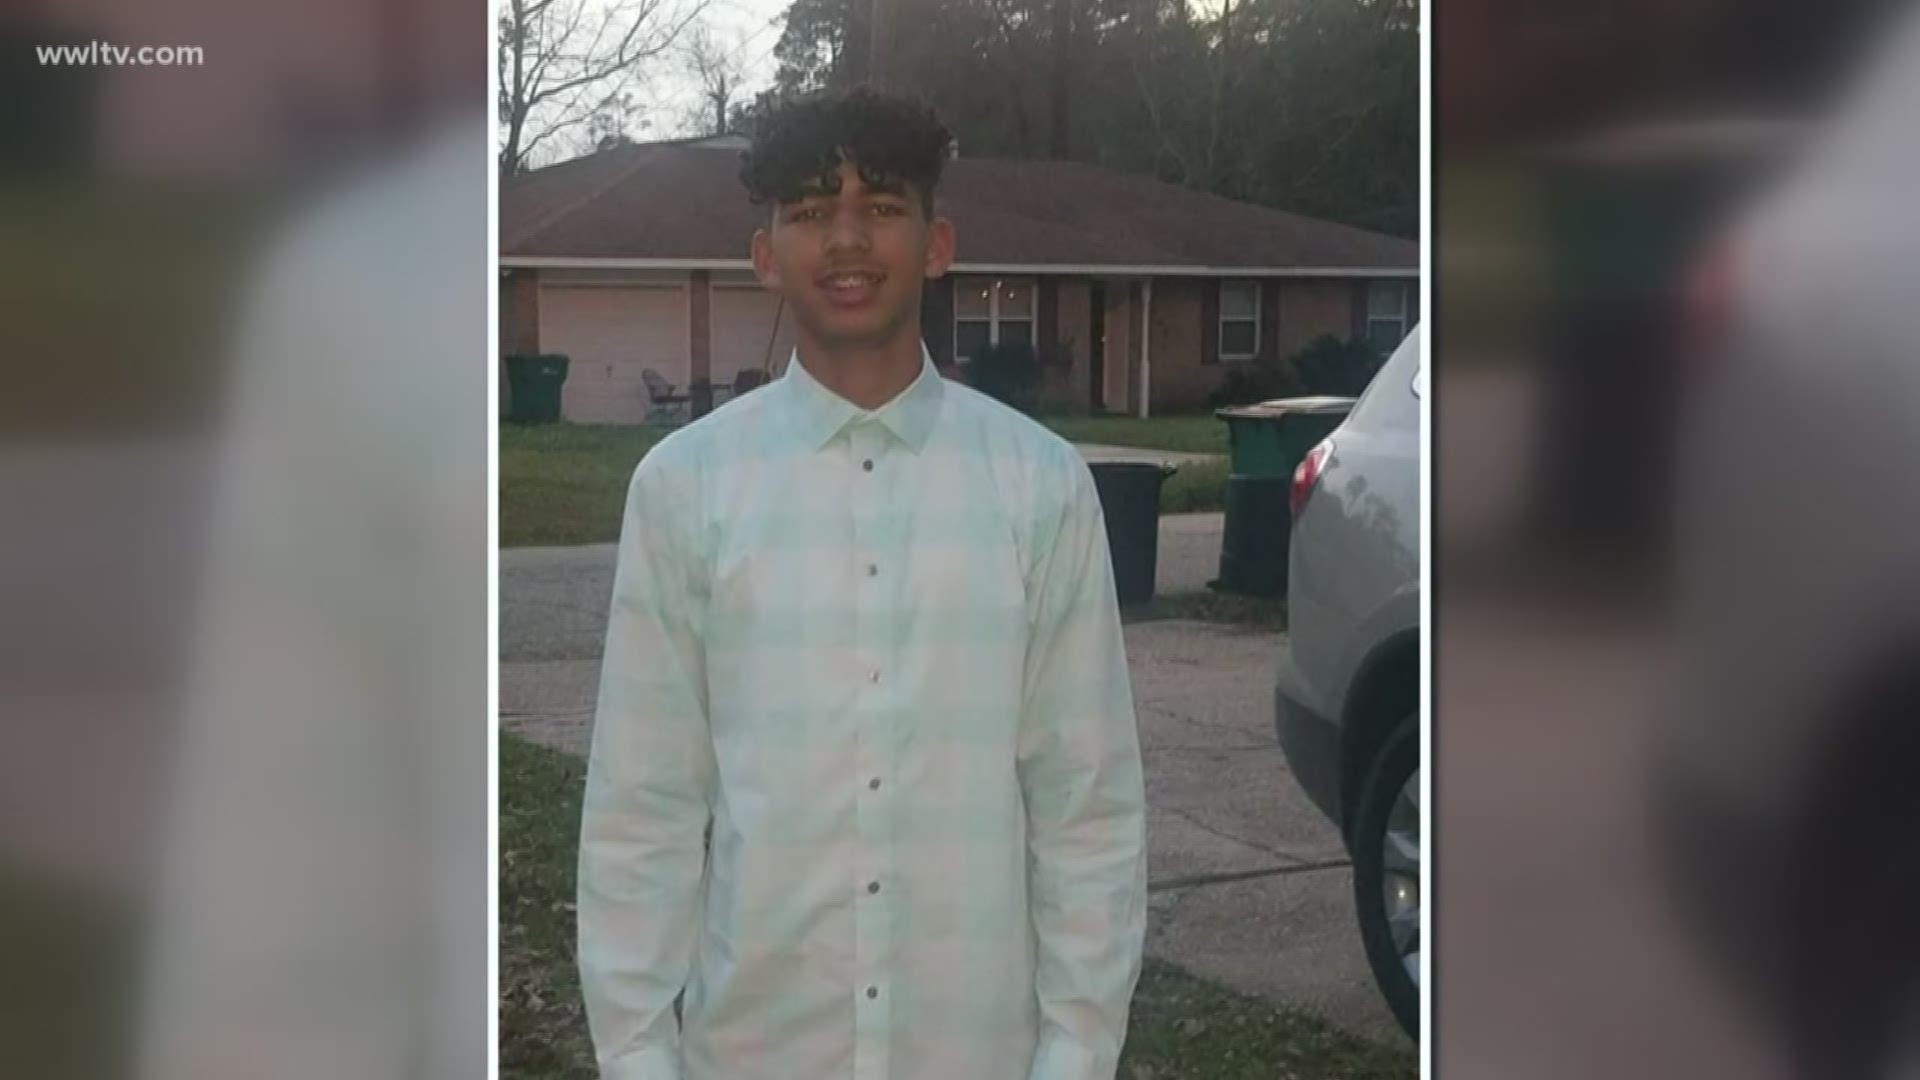 The body of a missing 14-year-old boy was found Sunday night in the East Pearl River near Interstate 10.